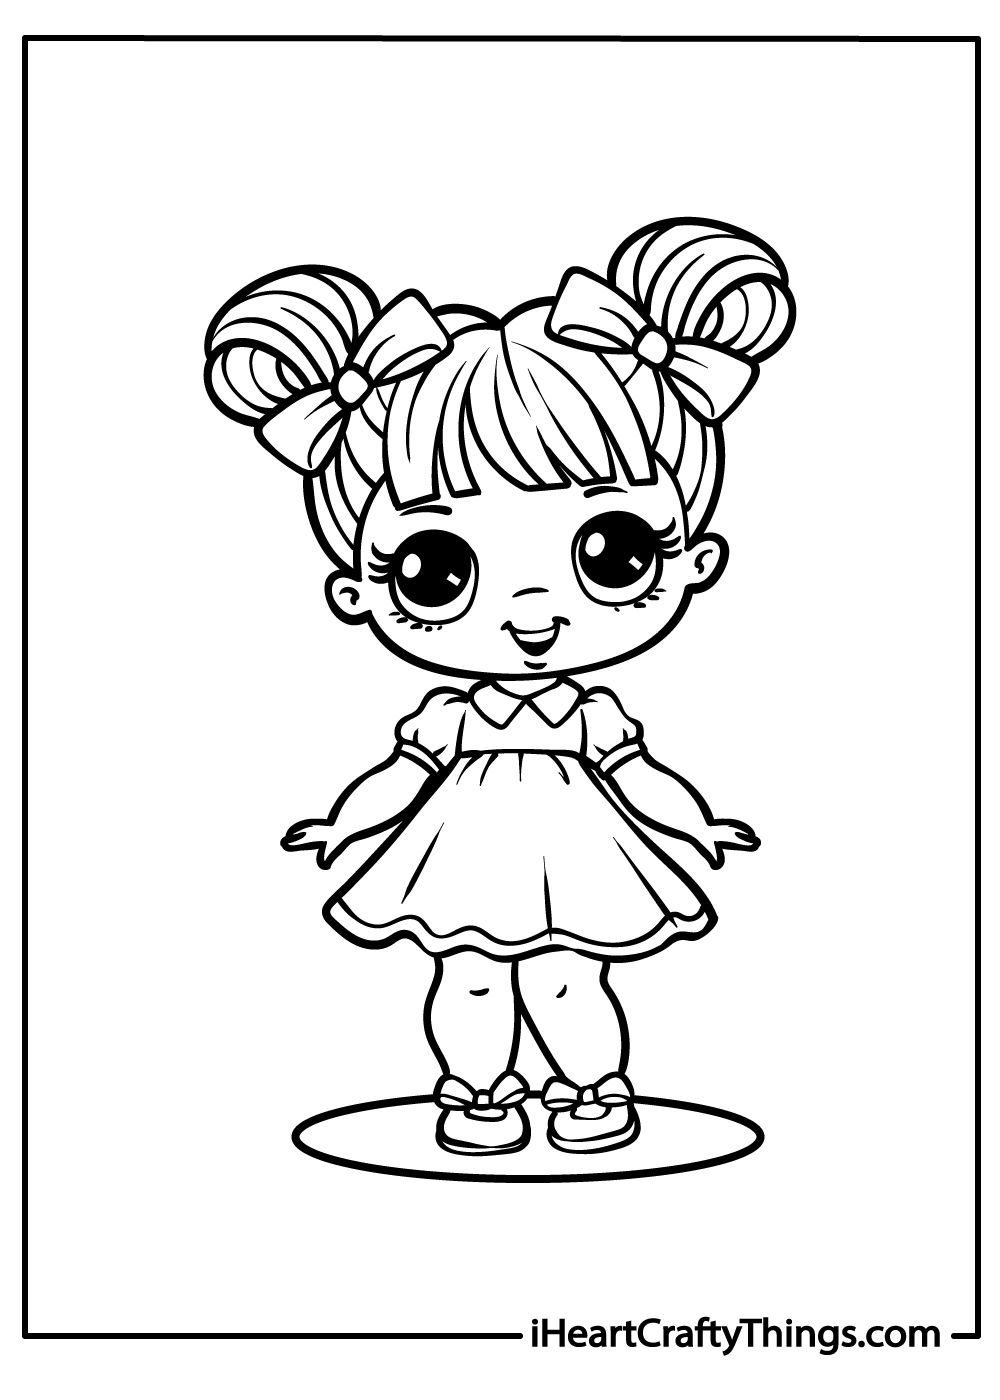 dolls coloring sheets for download